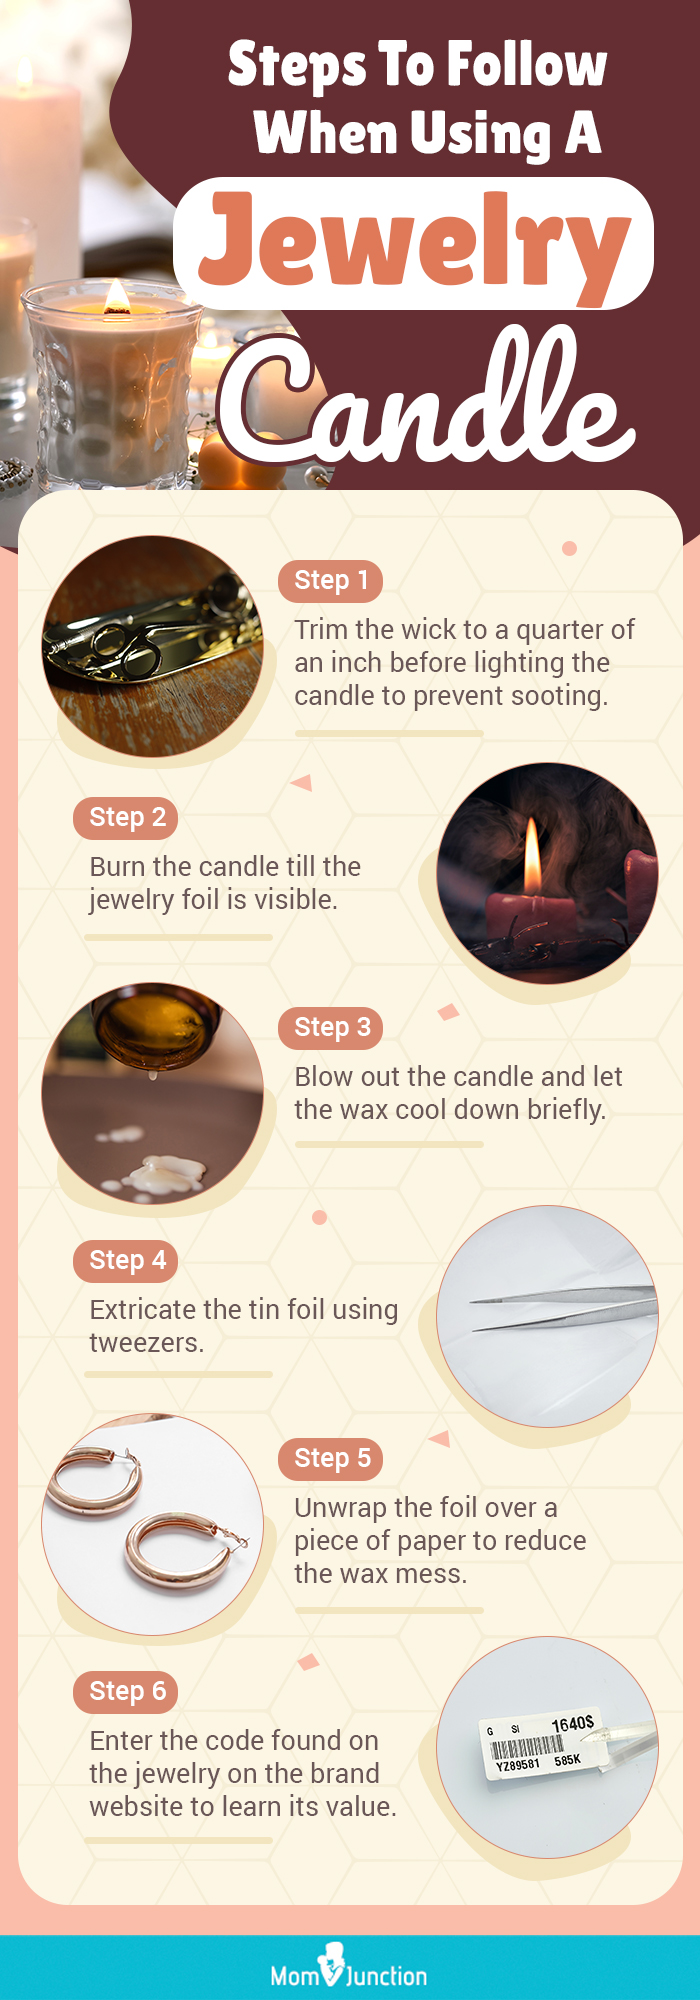 Steps To Follow When Using A Jewelry Candle (infographic)